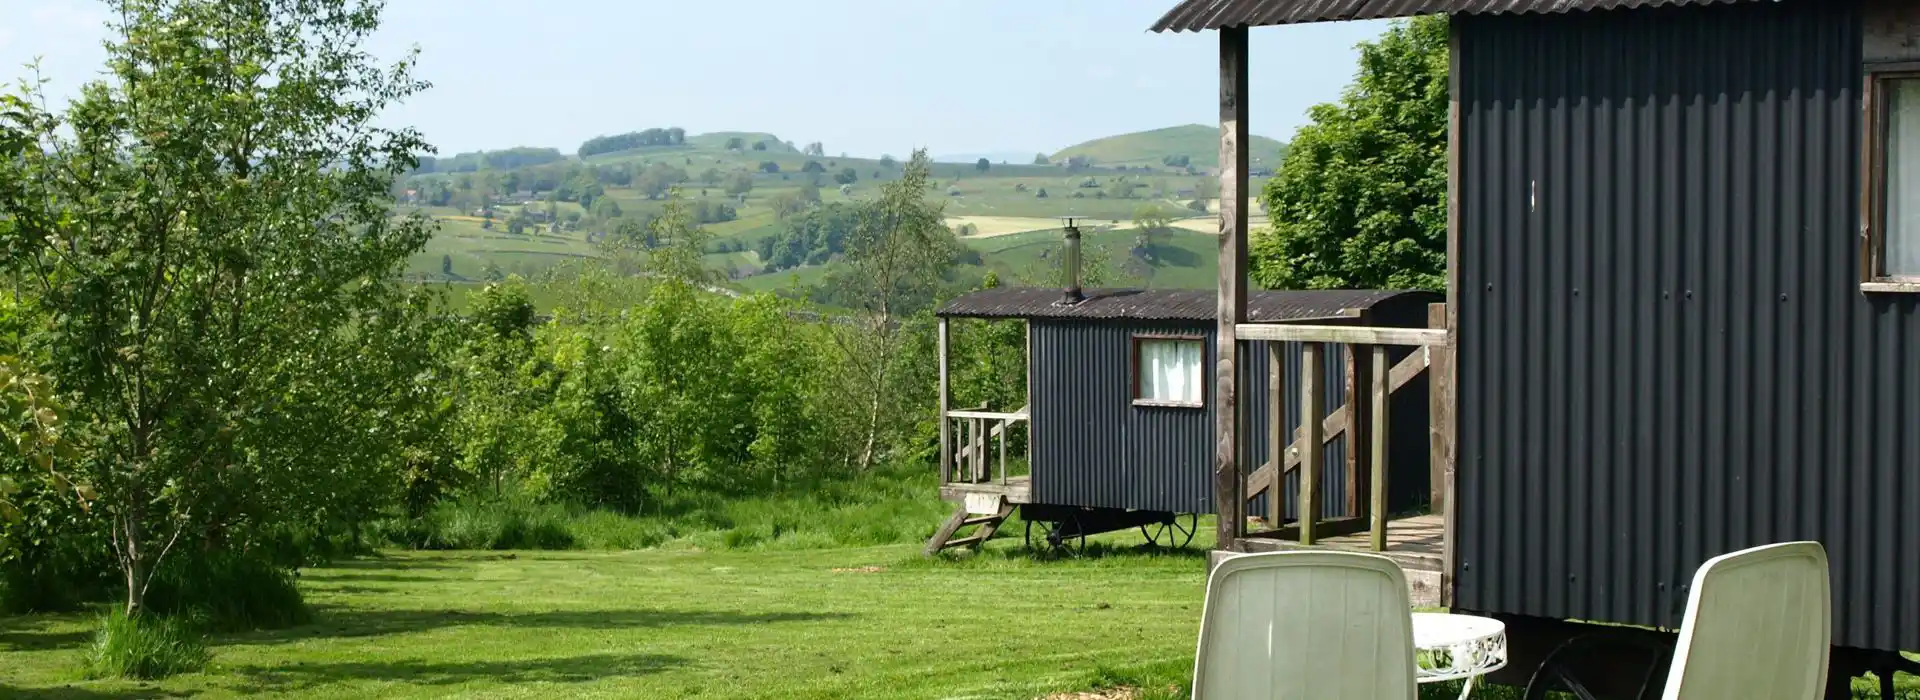 Glamping accommodation in Derbyshire and the Peak District